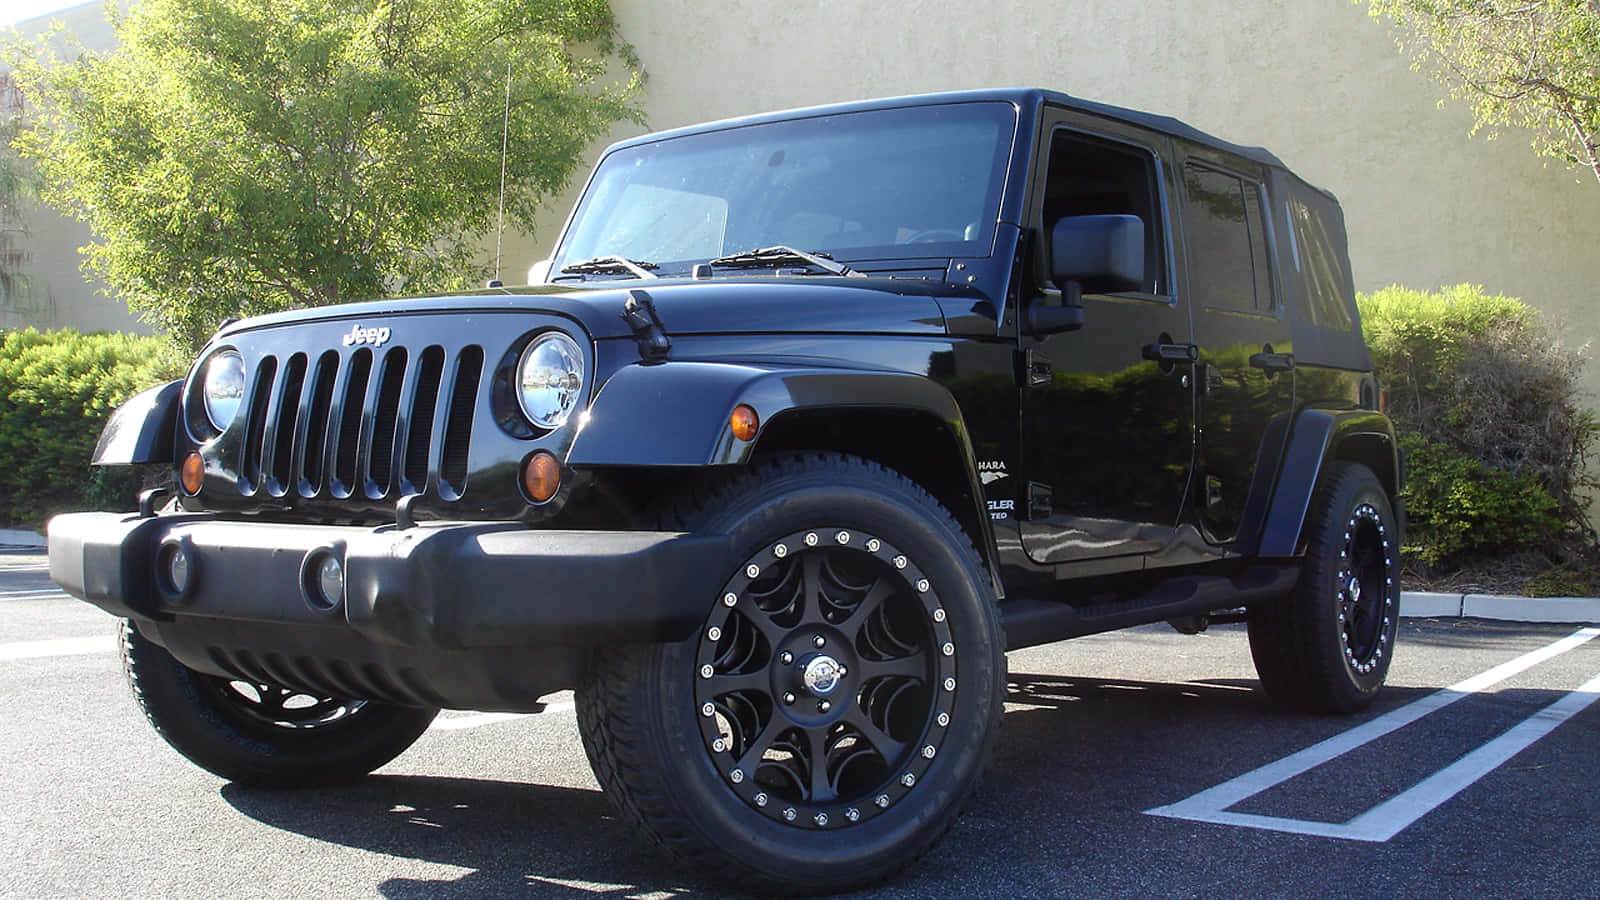 A Black Jeep Parked In A Parking Lot